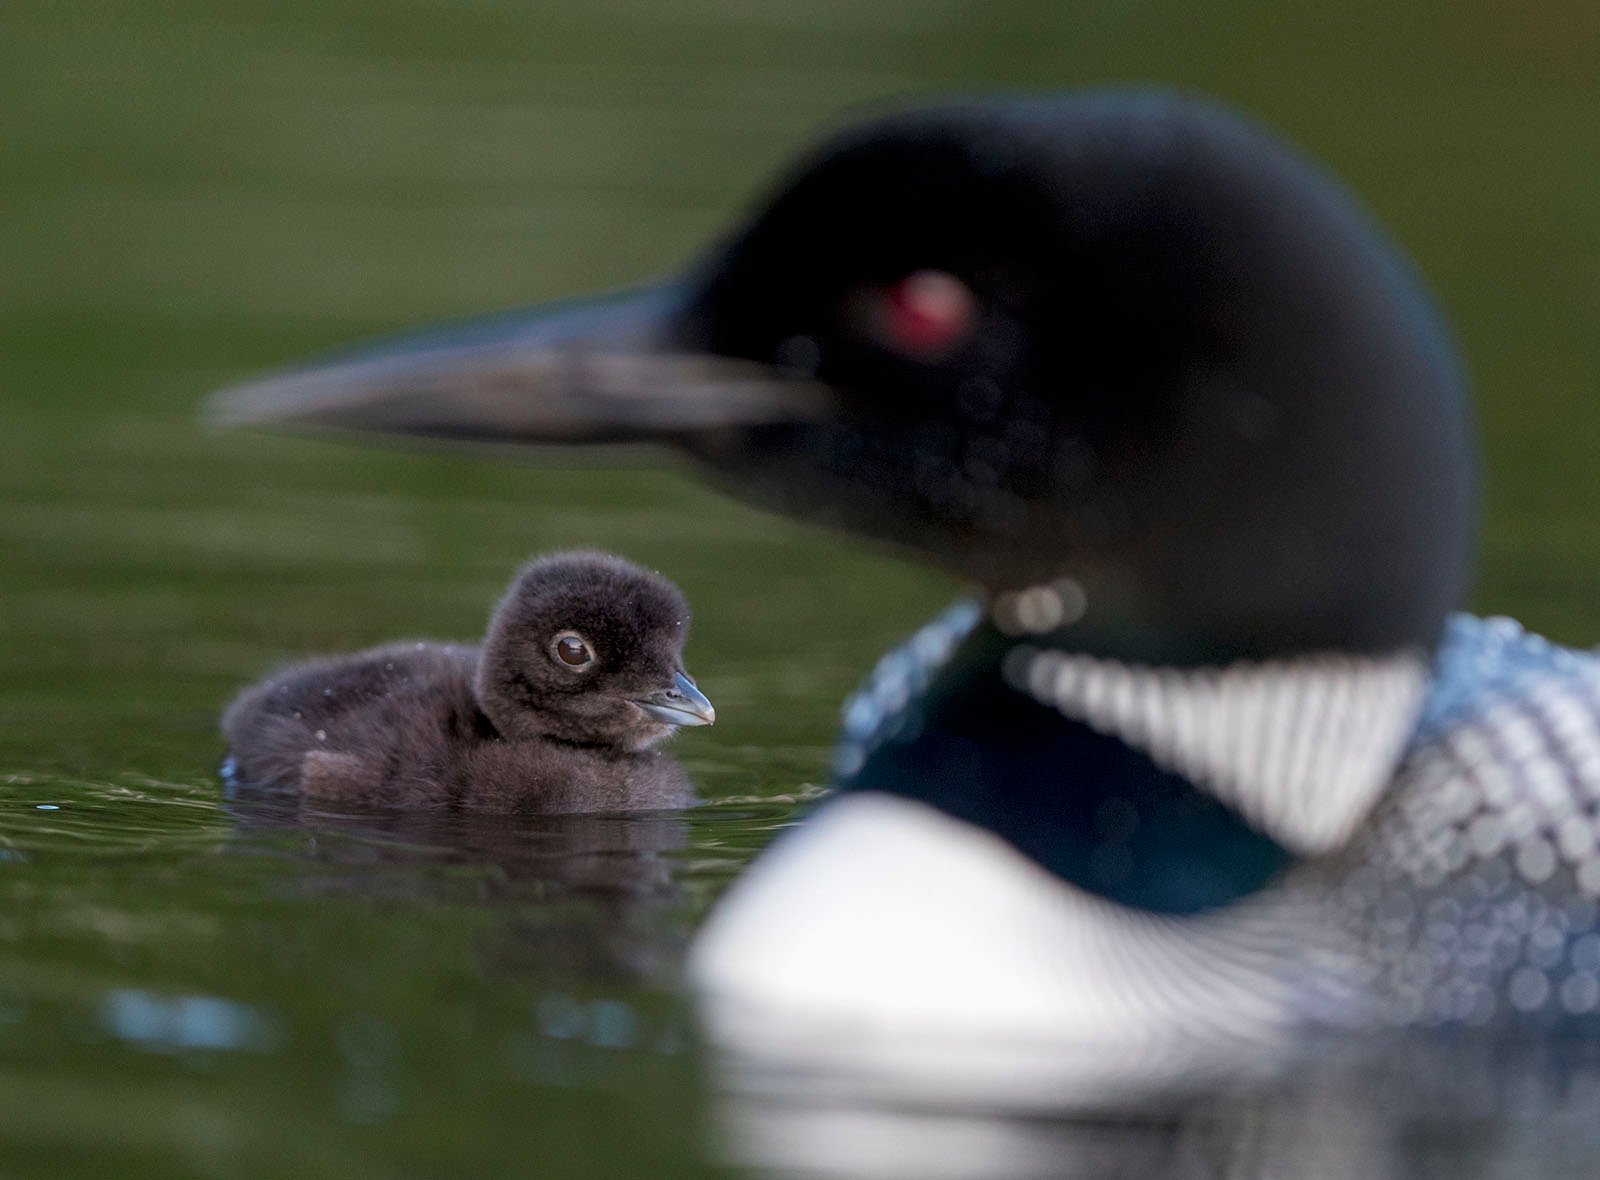 Close-up of a loon swimming on the water with its fluffy dark brown chick. The striking black and white patterned plumage of adult loons contrasts with the simple brown plumage of nestlings.